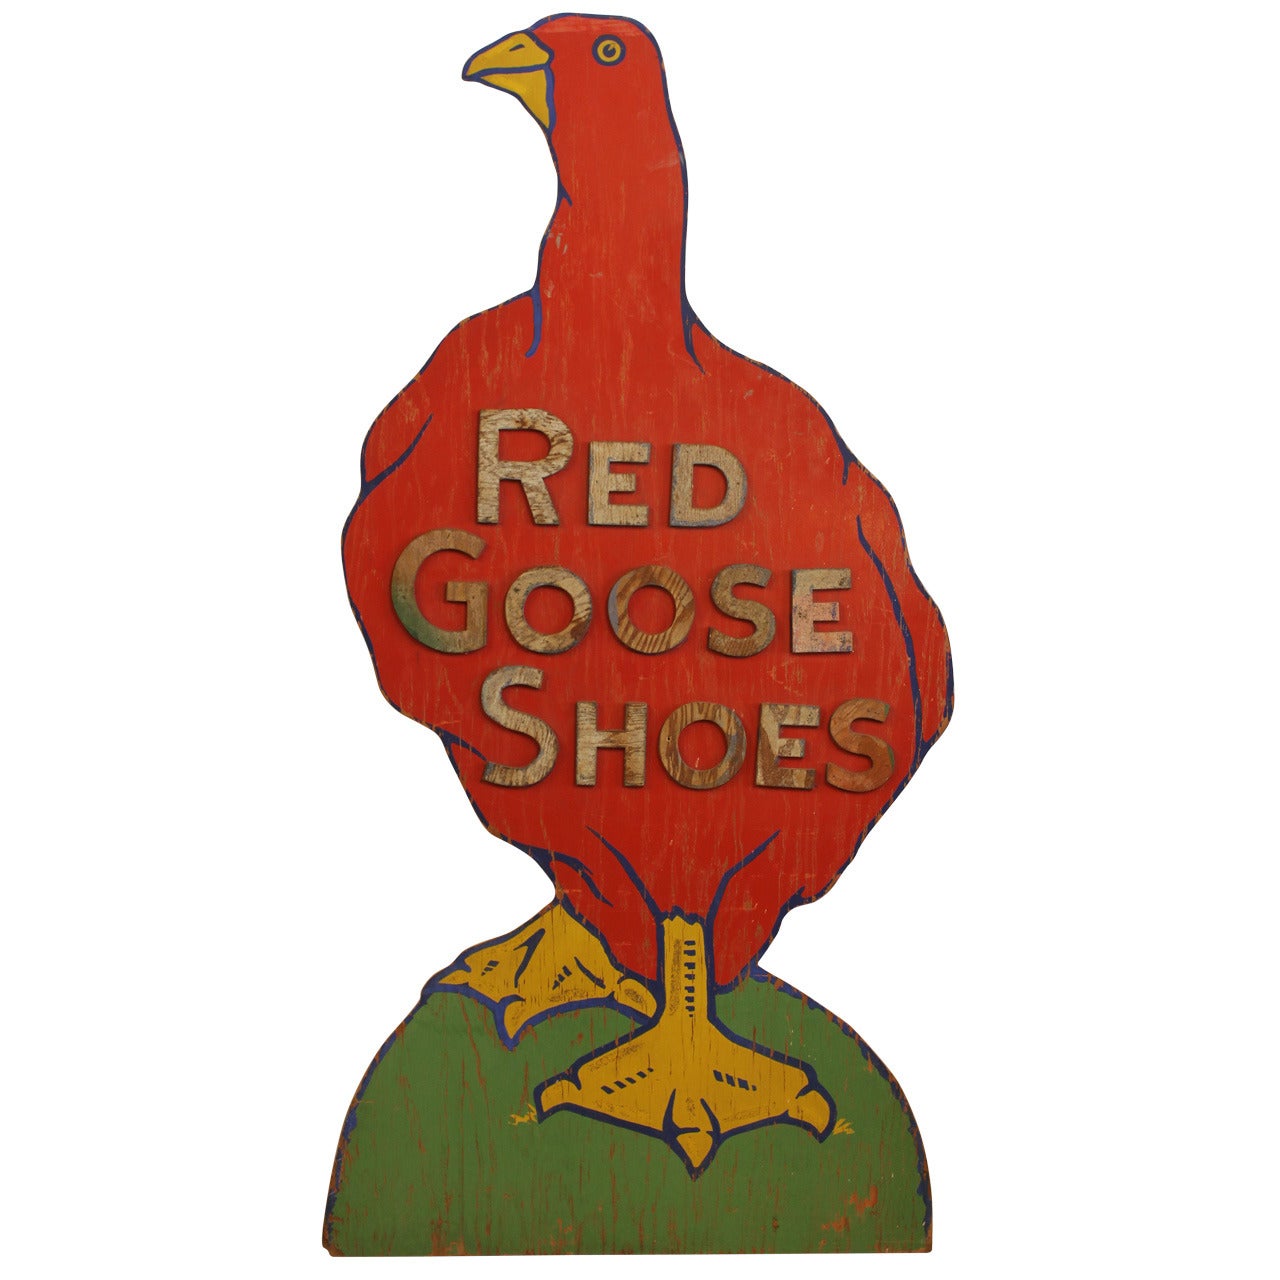 Antique Wood Red Goose Shoes Sign